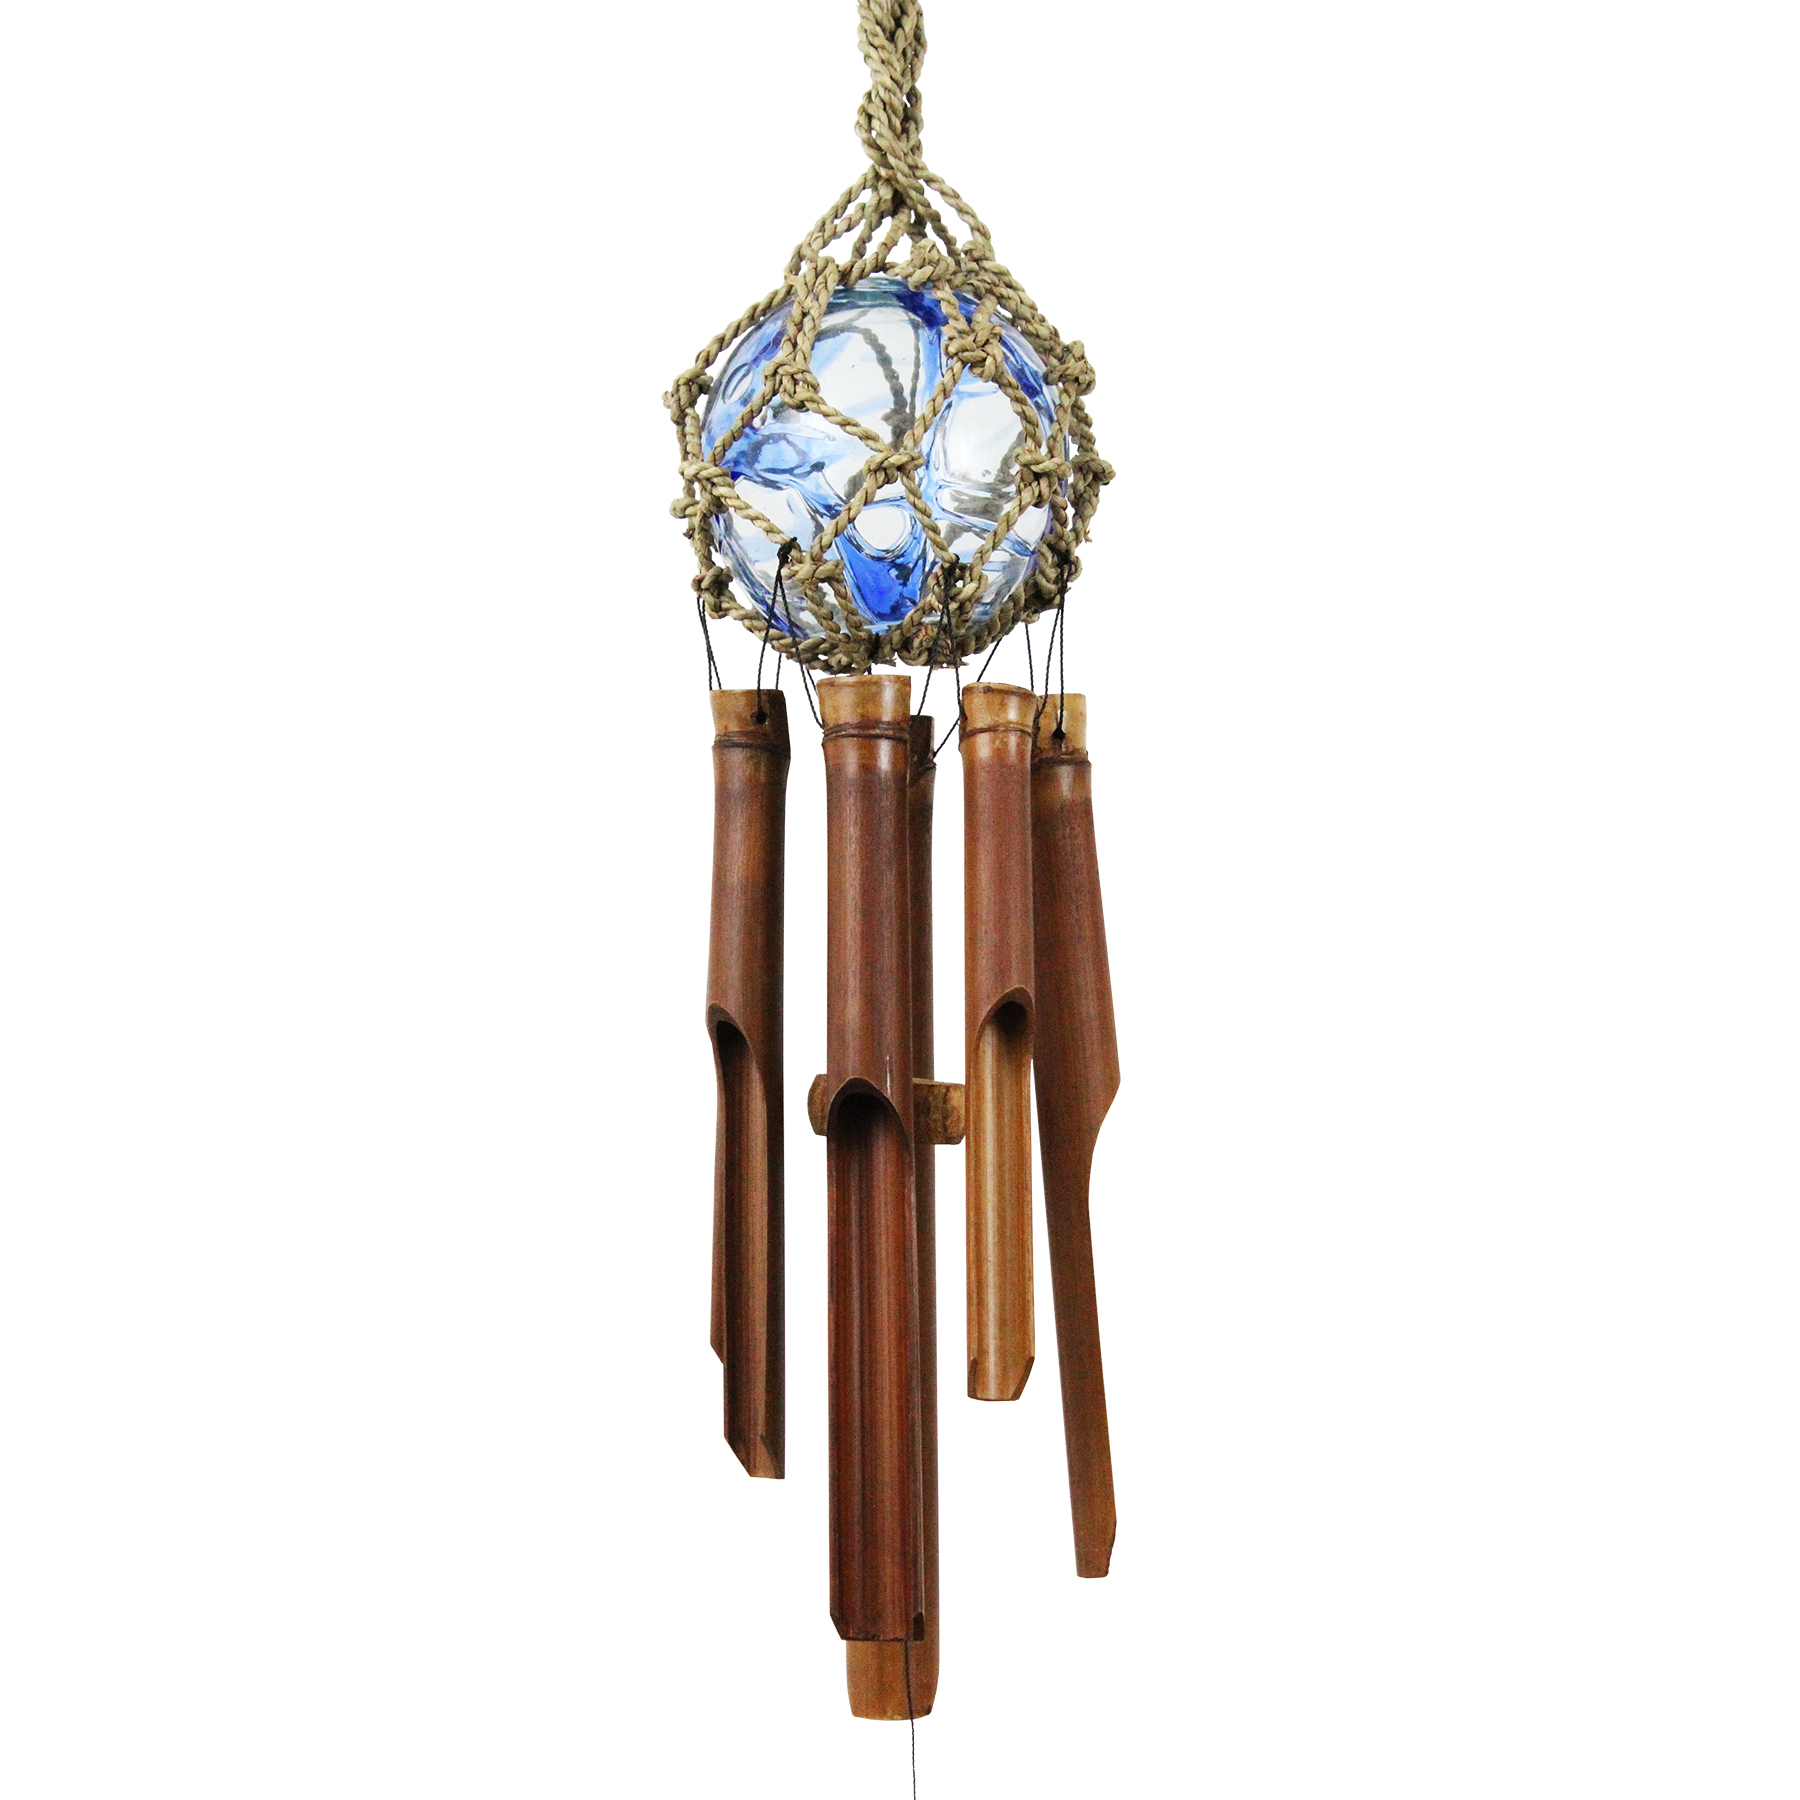 Cohasset Gifts & Garden 4" Clear w/Blue Trail Glass Ball Chime